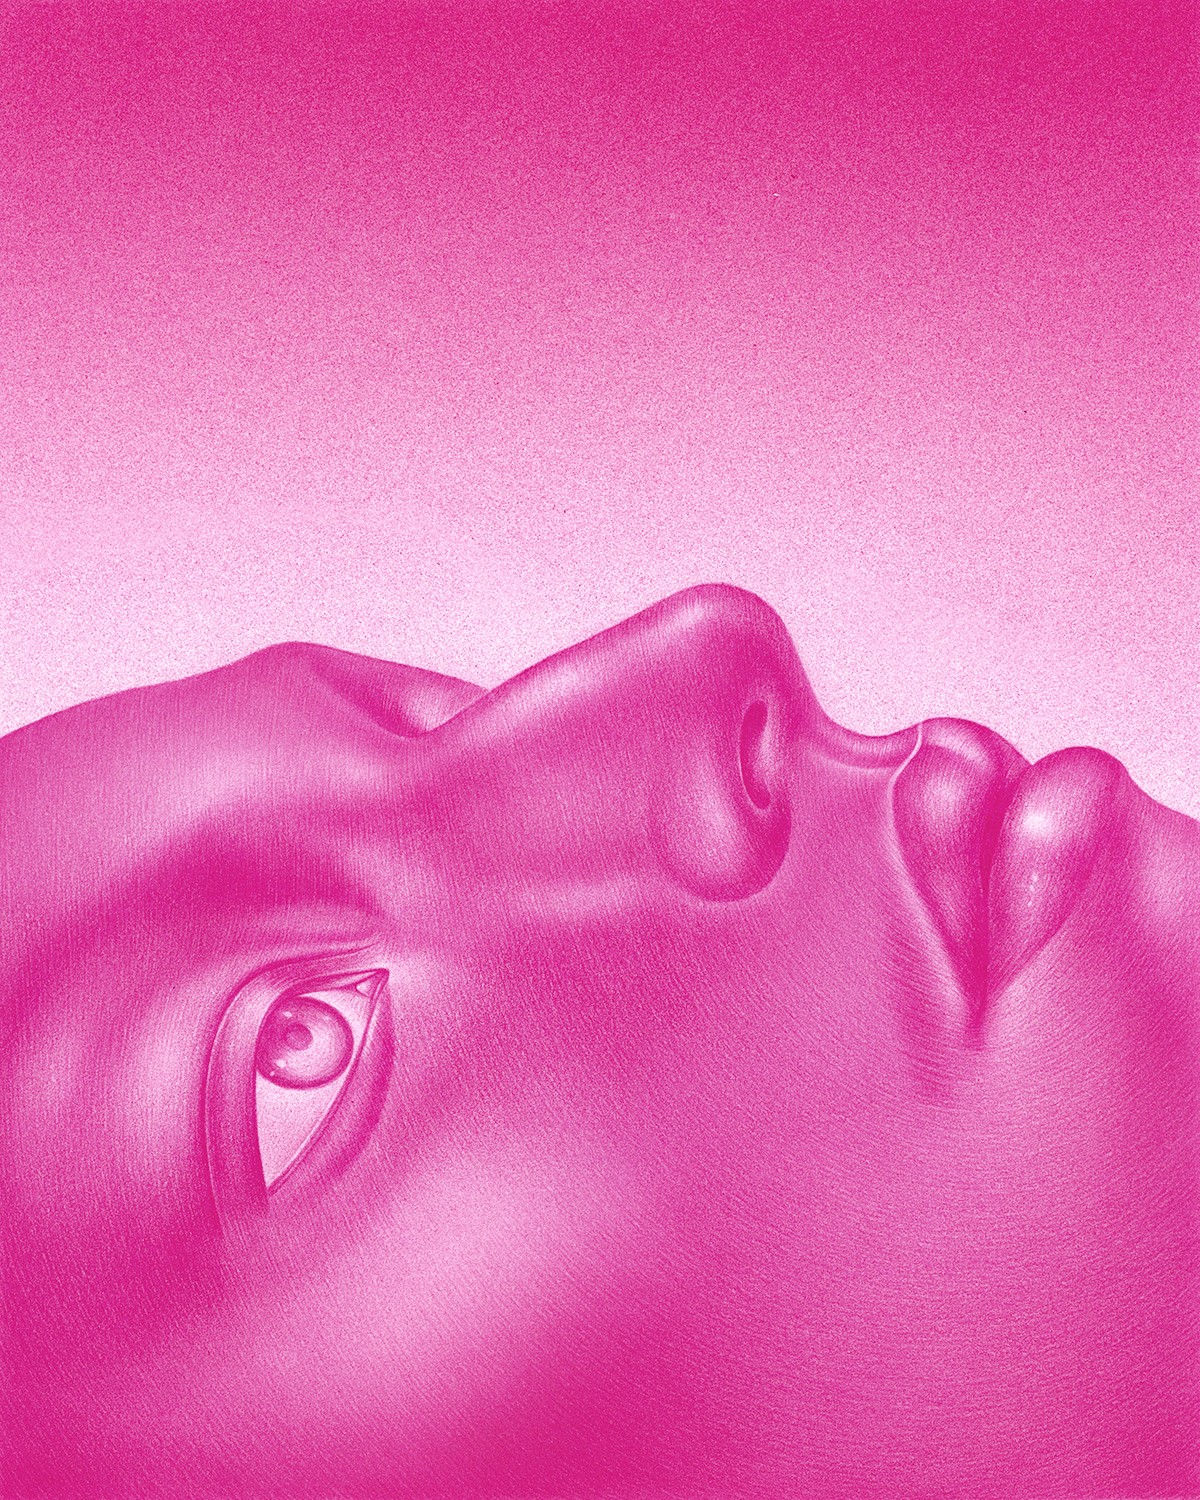 a cropped bright pink pencil drawing of a face laying down, eyes open